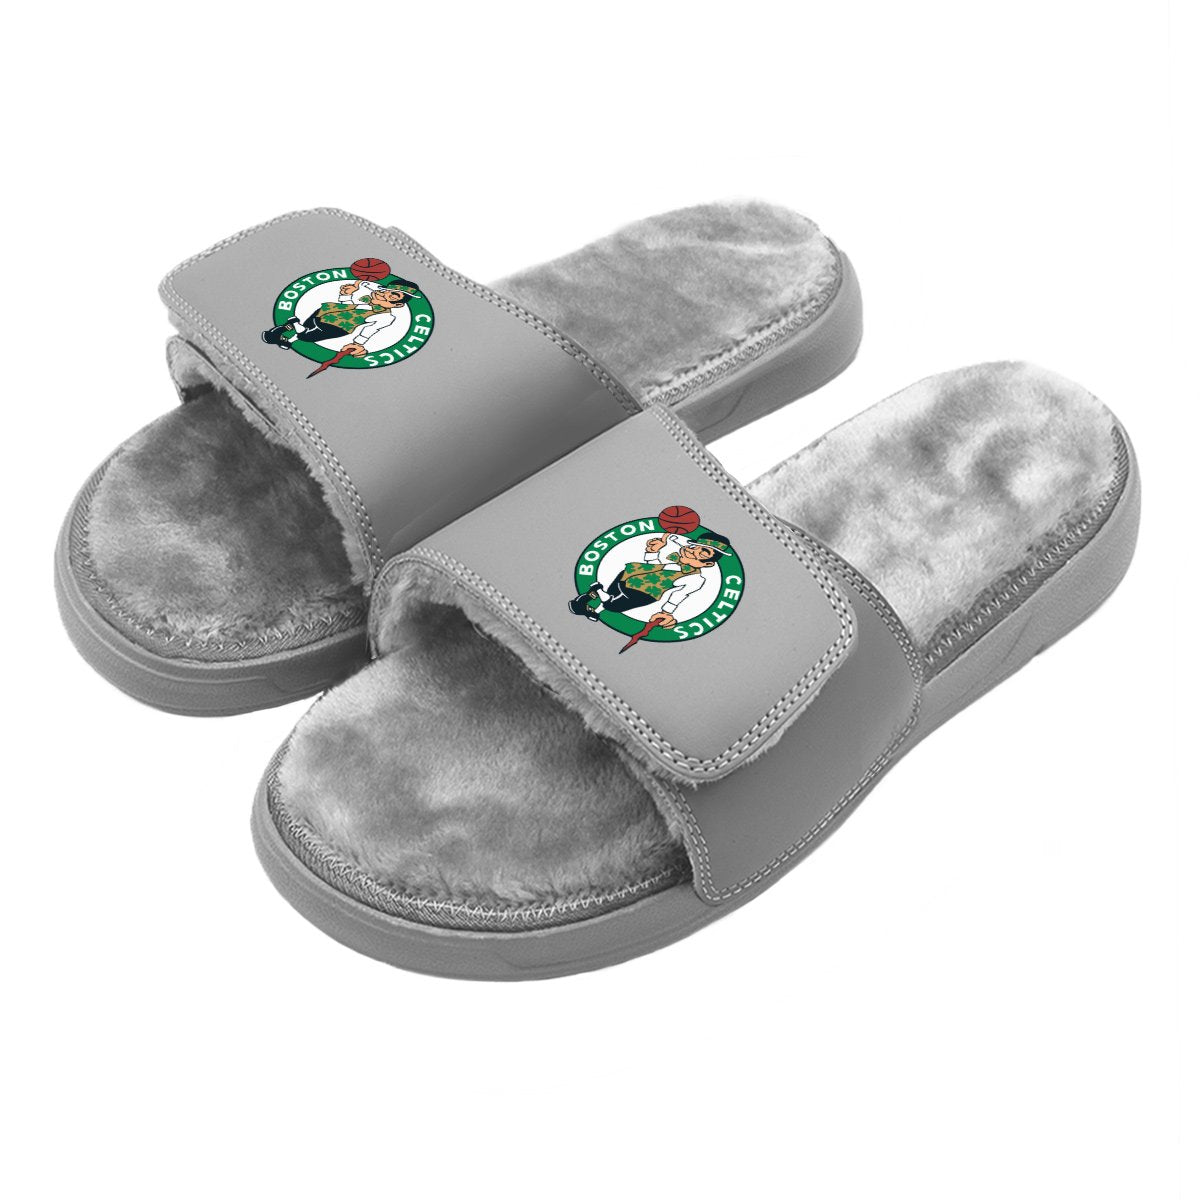 ISlides Official - Boston Bruins Blown Up 12 / Grey Slides - Sandals - Slippers